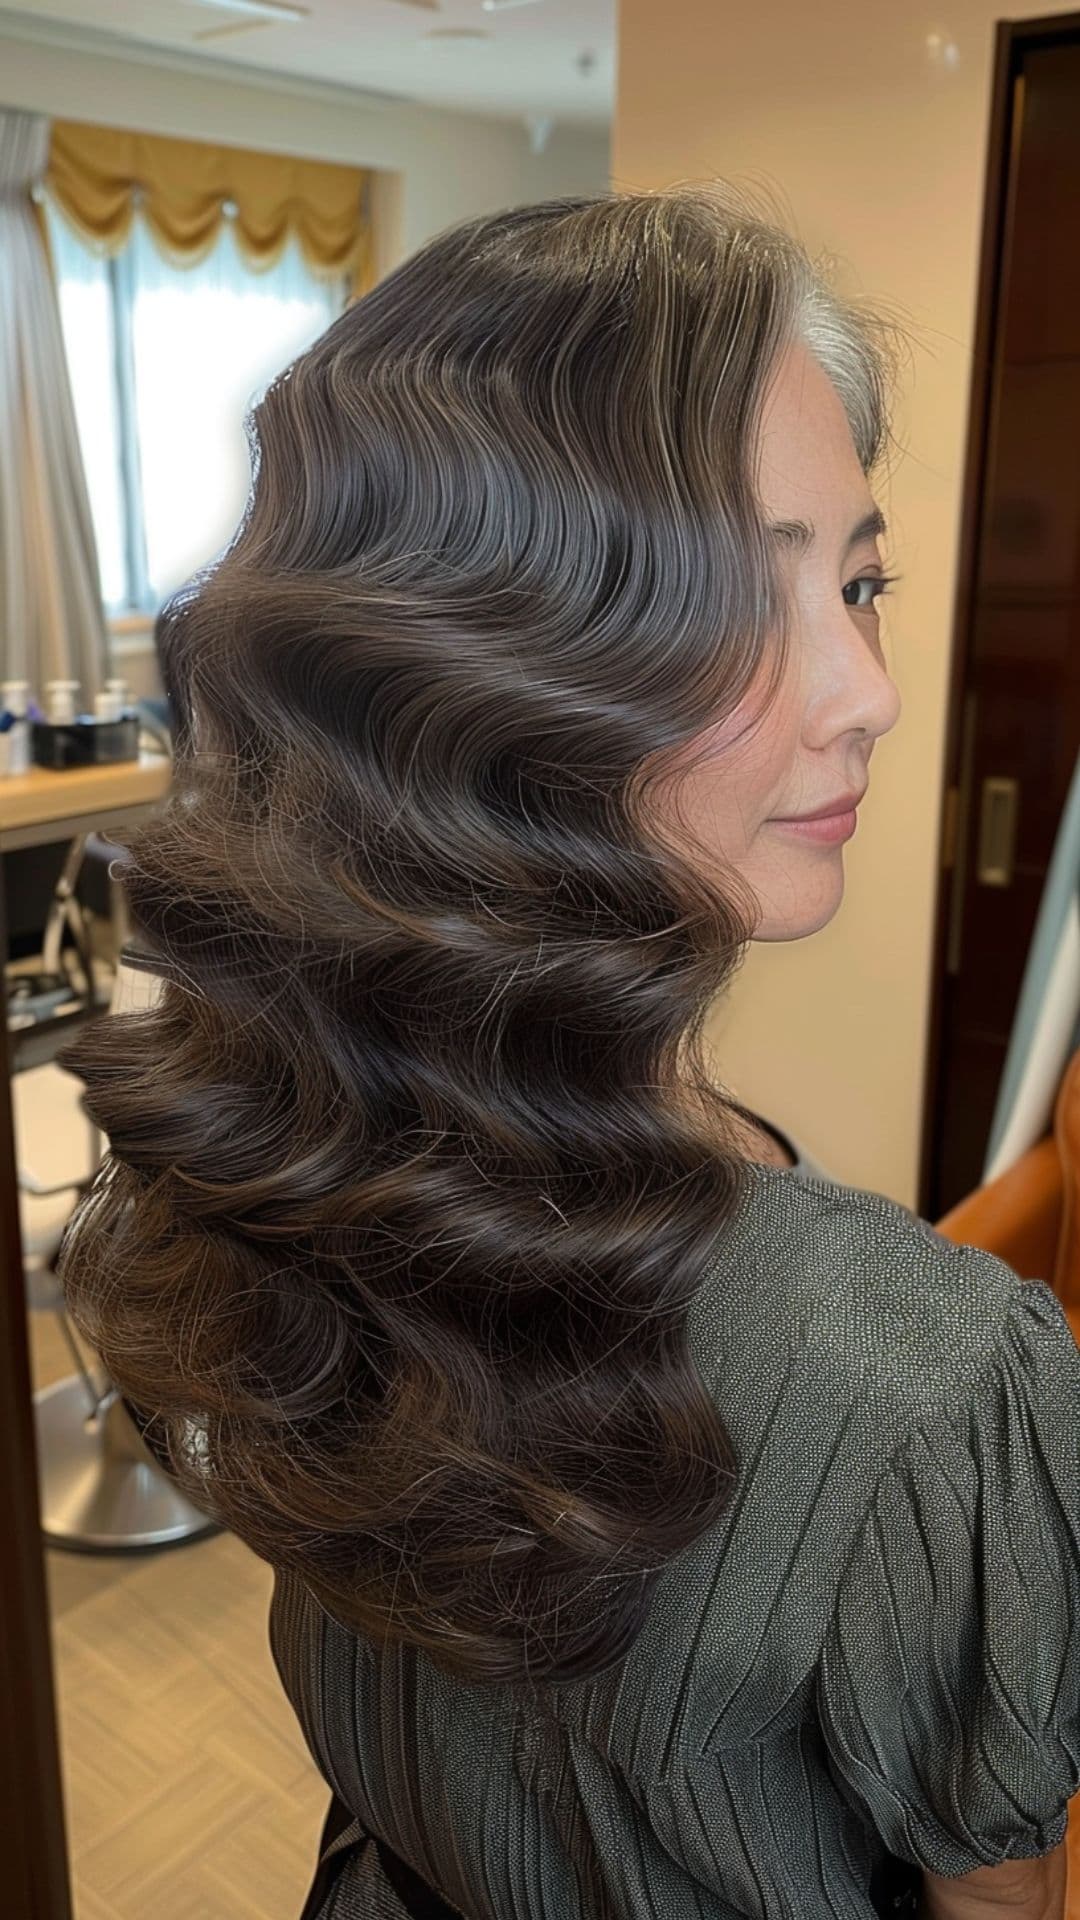 A woman modelling a classic hollywood waves hairstyle.